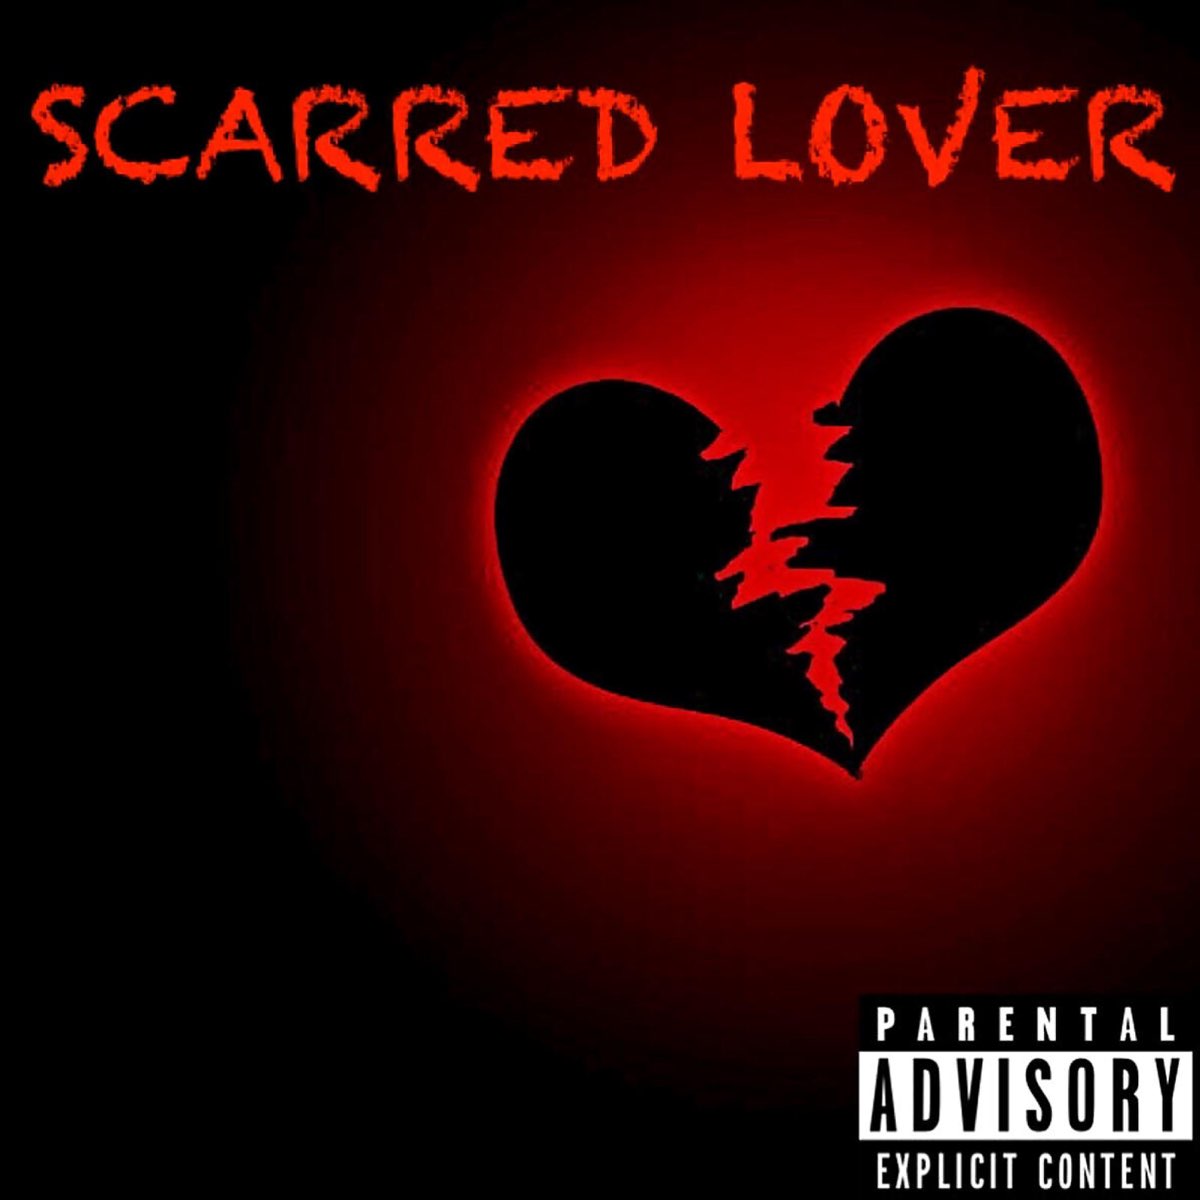 Scary Love. Love scars 4.